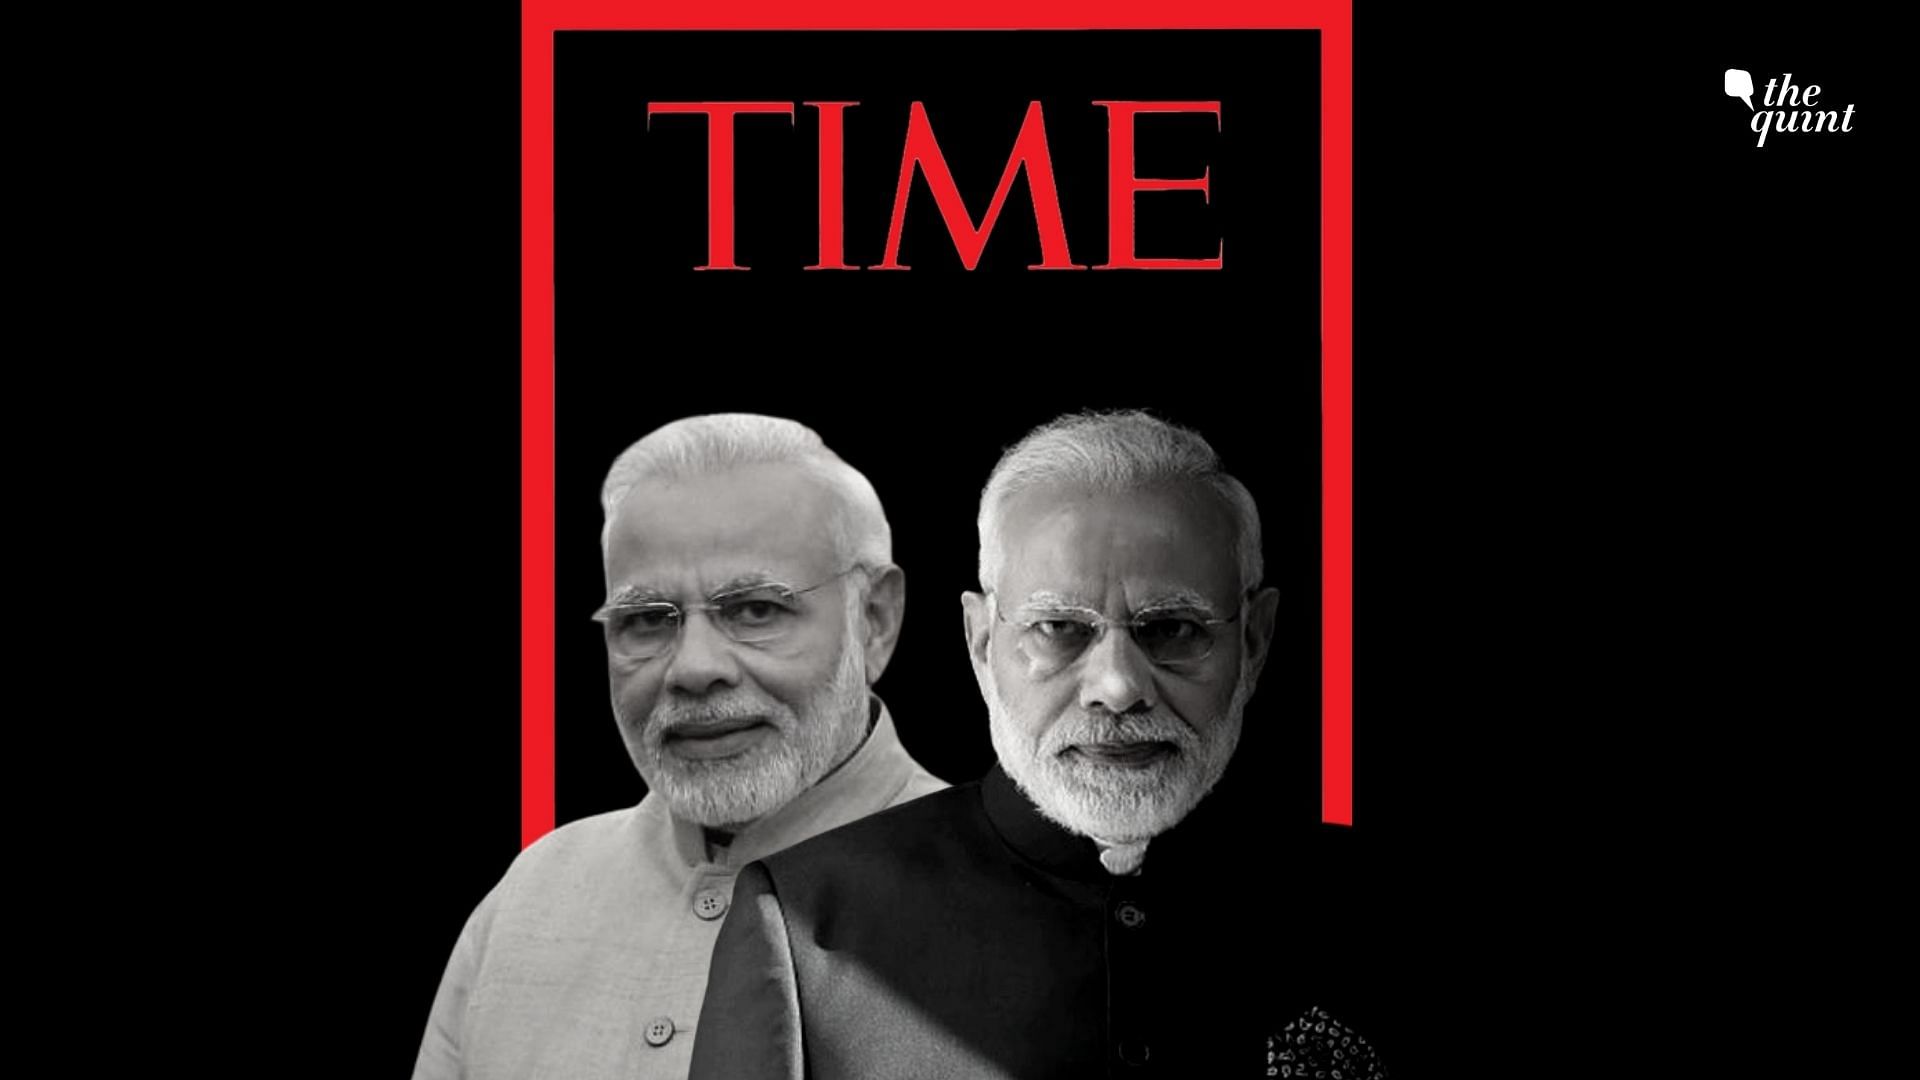 Prime Minister Narendra Modi featuring in TIME’s ‘100 Most Influential People of 2020’ was one of the top headlines of Wednesday, 23 September.